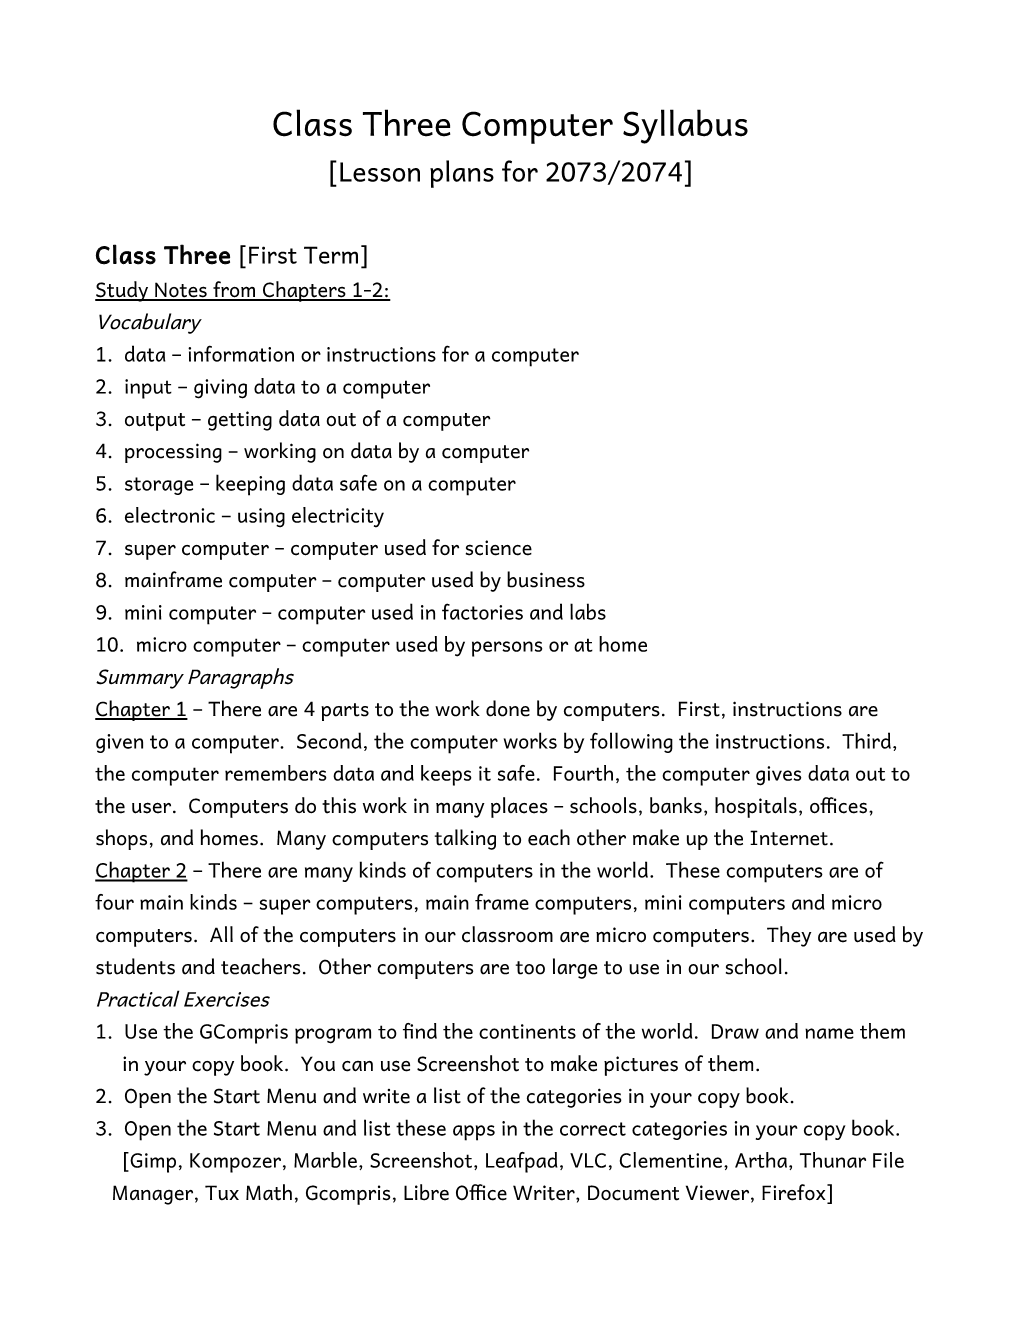 Class Three Computer Syllabus [Lesson Plans for 2073/2074]